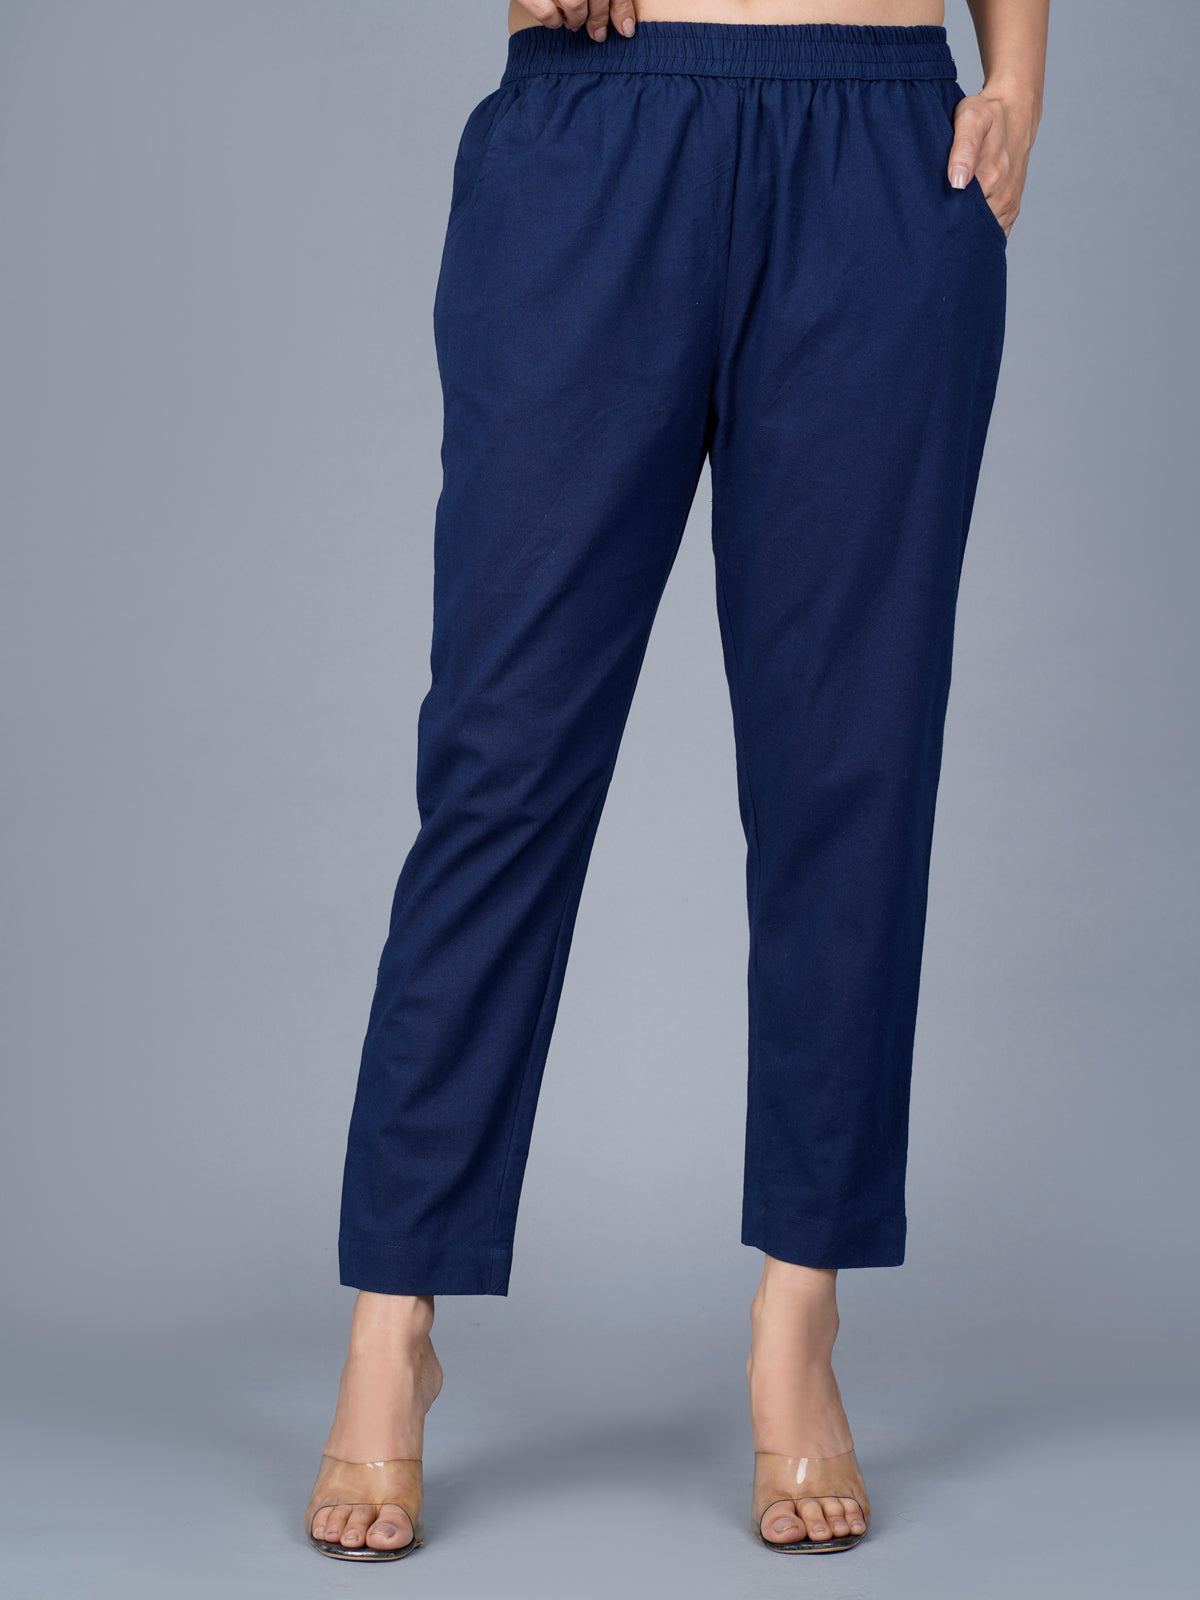 Pack Of 2 Womens Regular Fit Brown And Navy Blue Fully Elastic Waistband Cotton Trouser